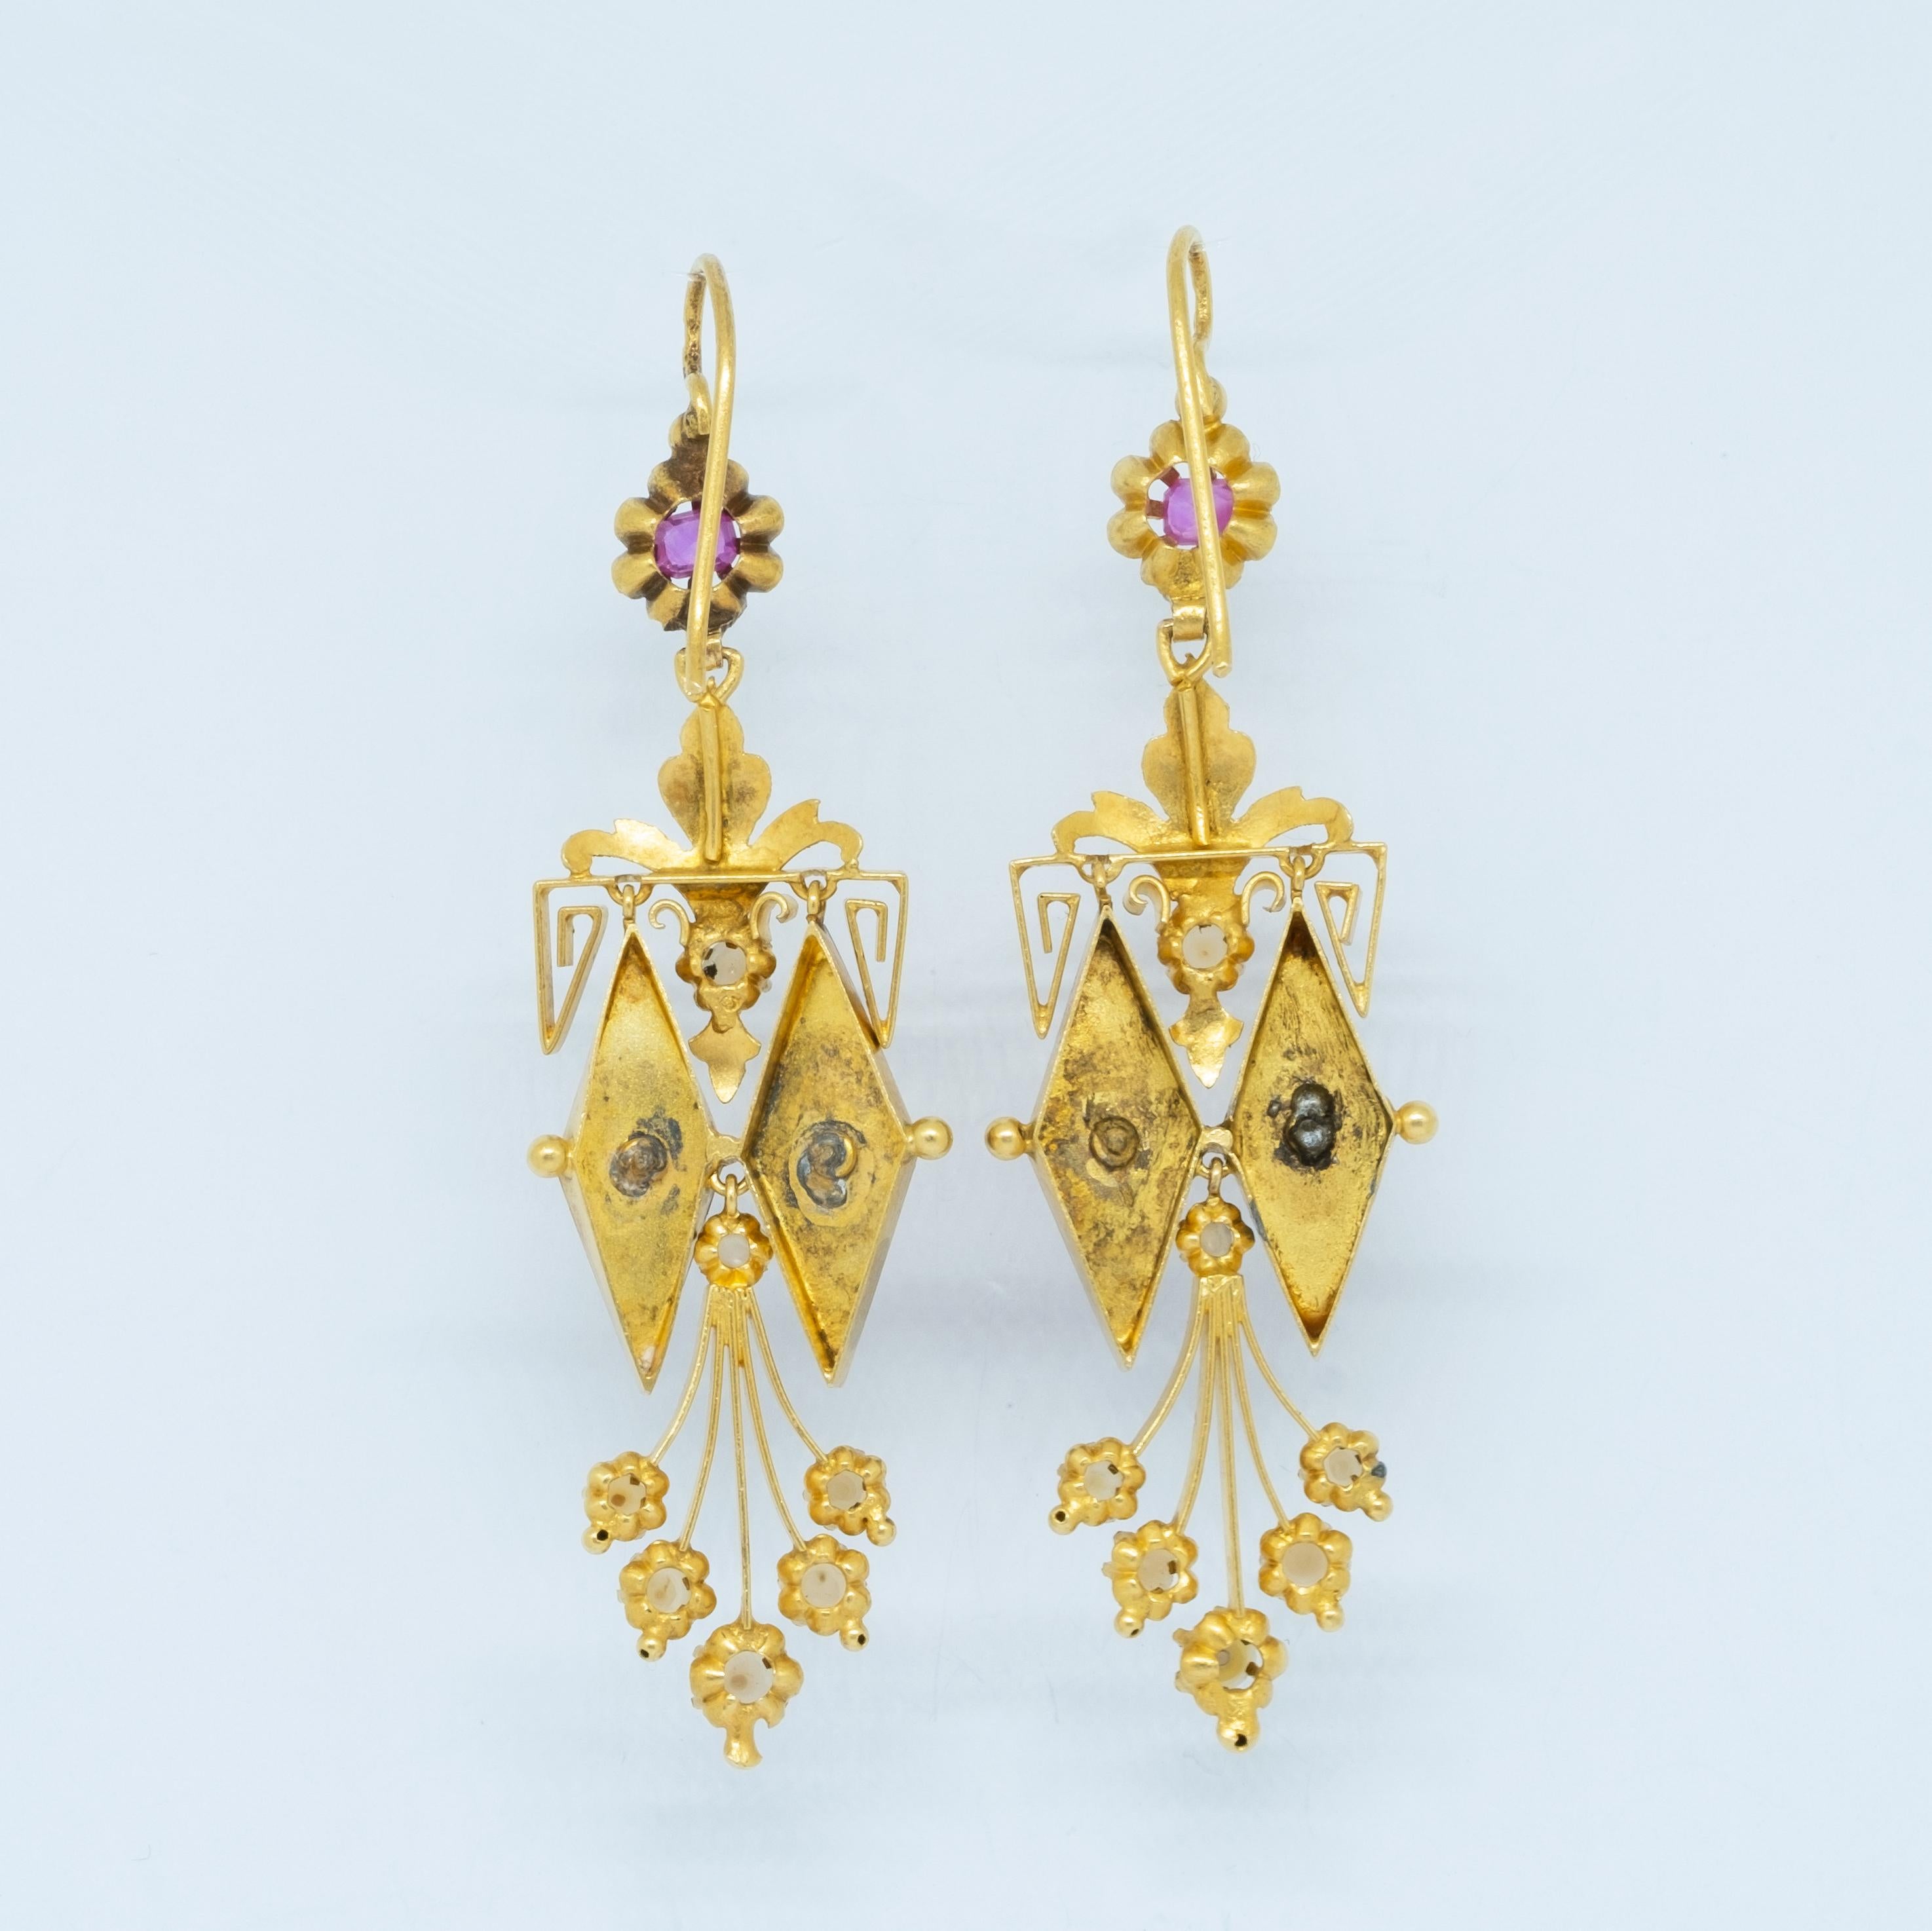 Charleston Pendant Earrings, 1920s In Good Condition For Sale In Milano, MI